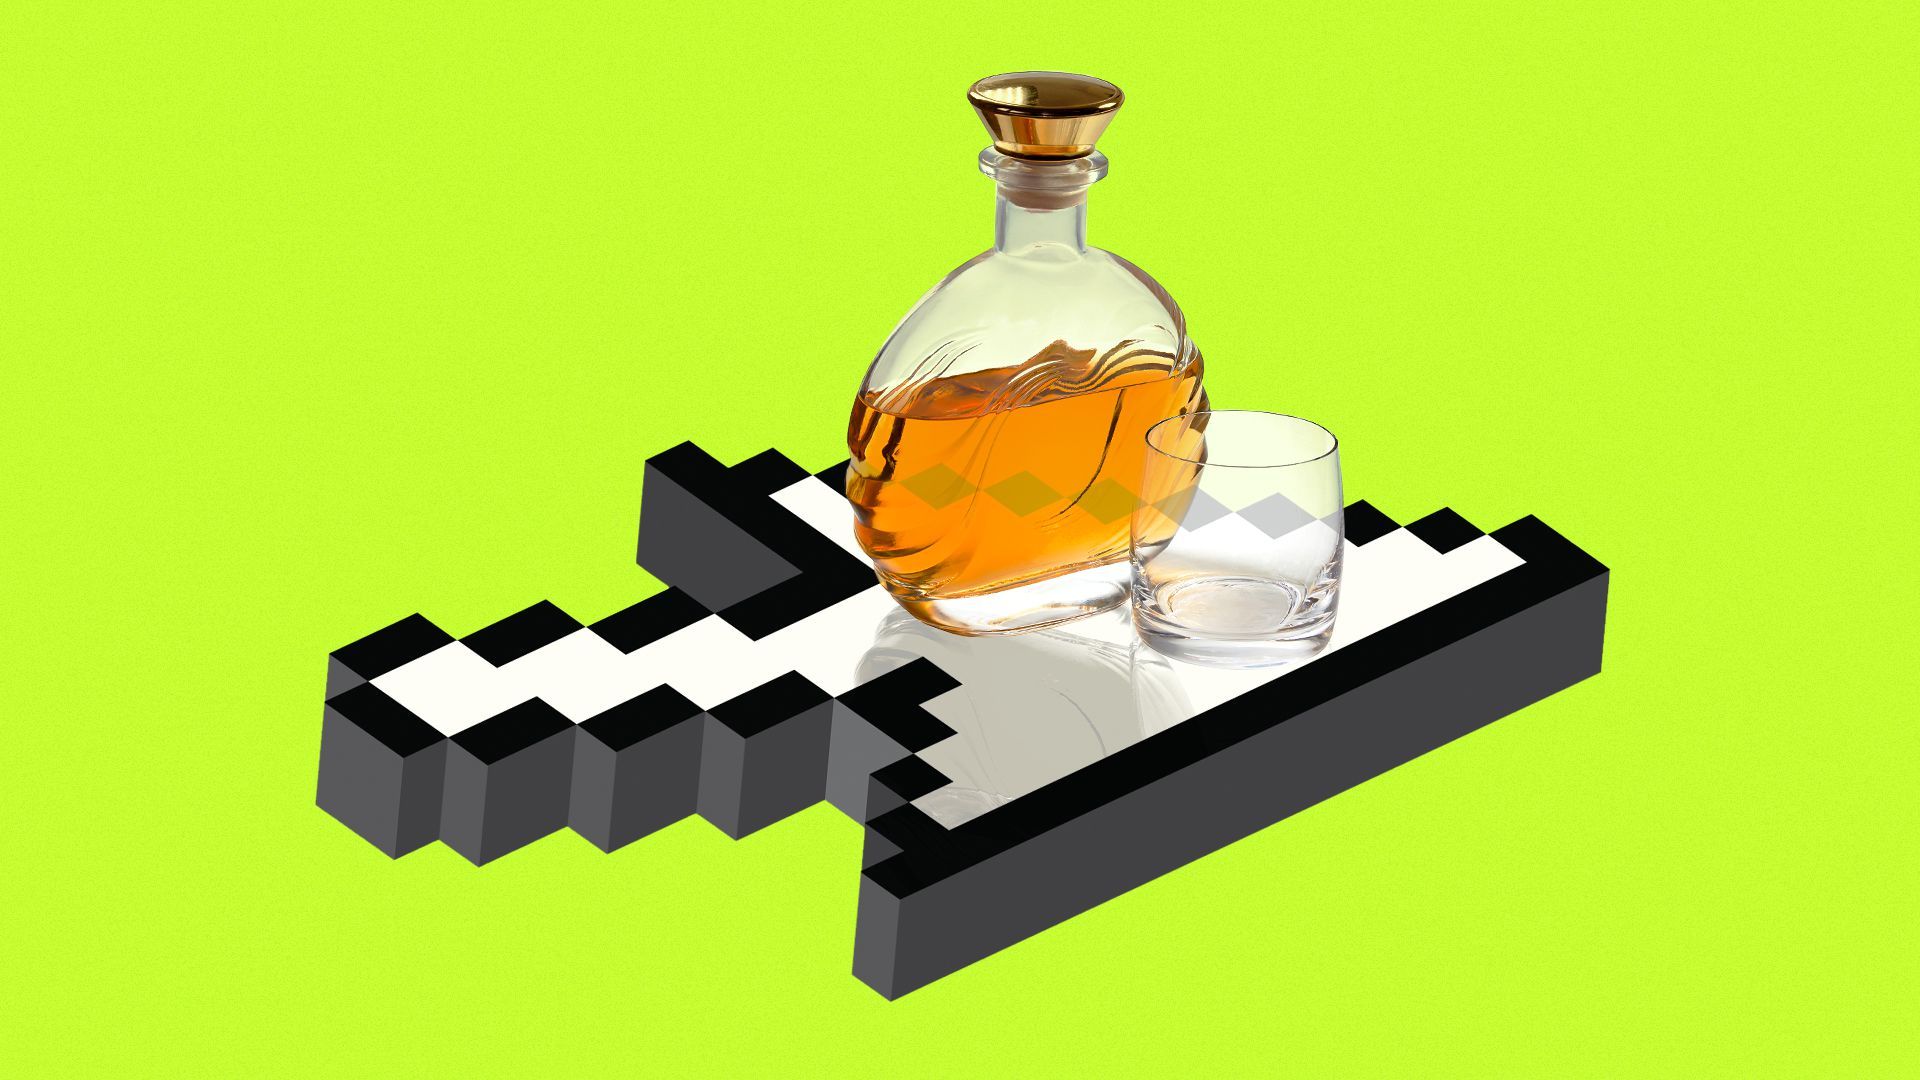 Illustration of a liquor bottle and glass being served on an arrow cursor